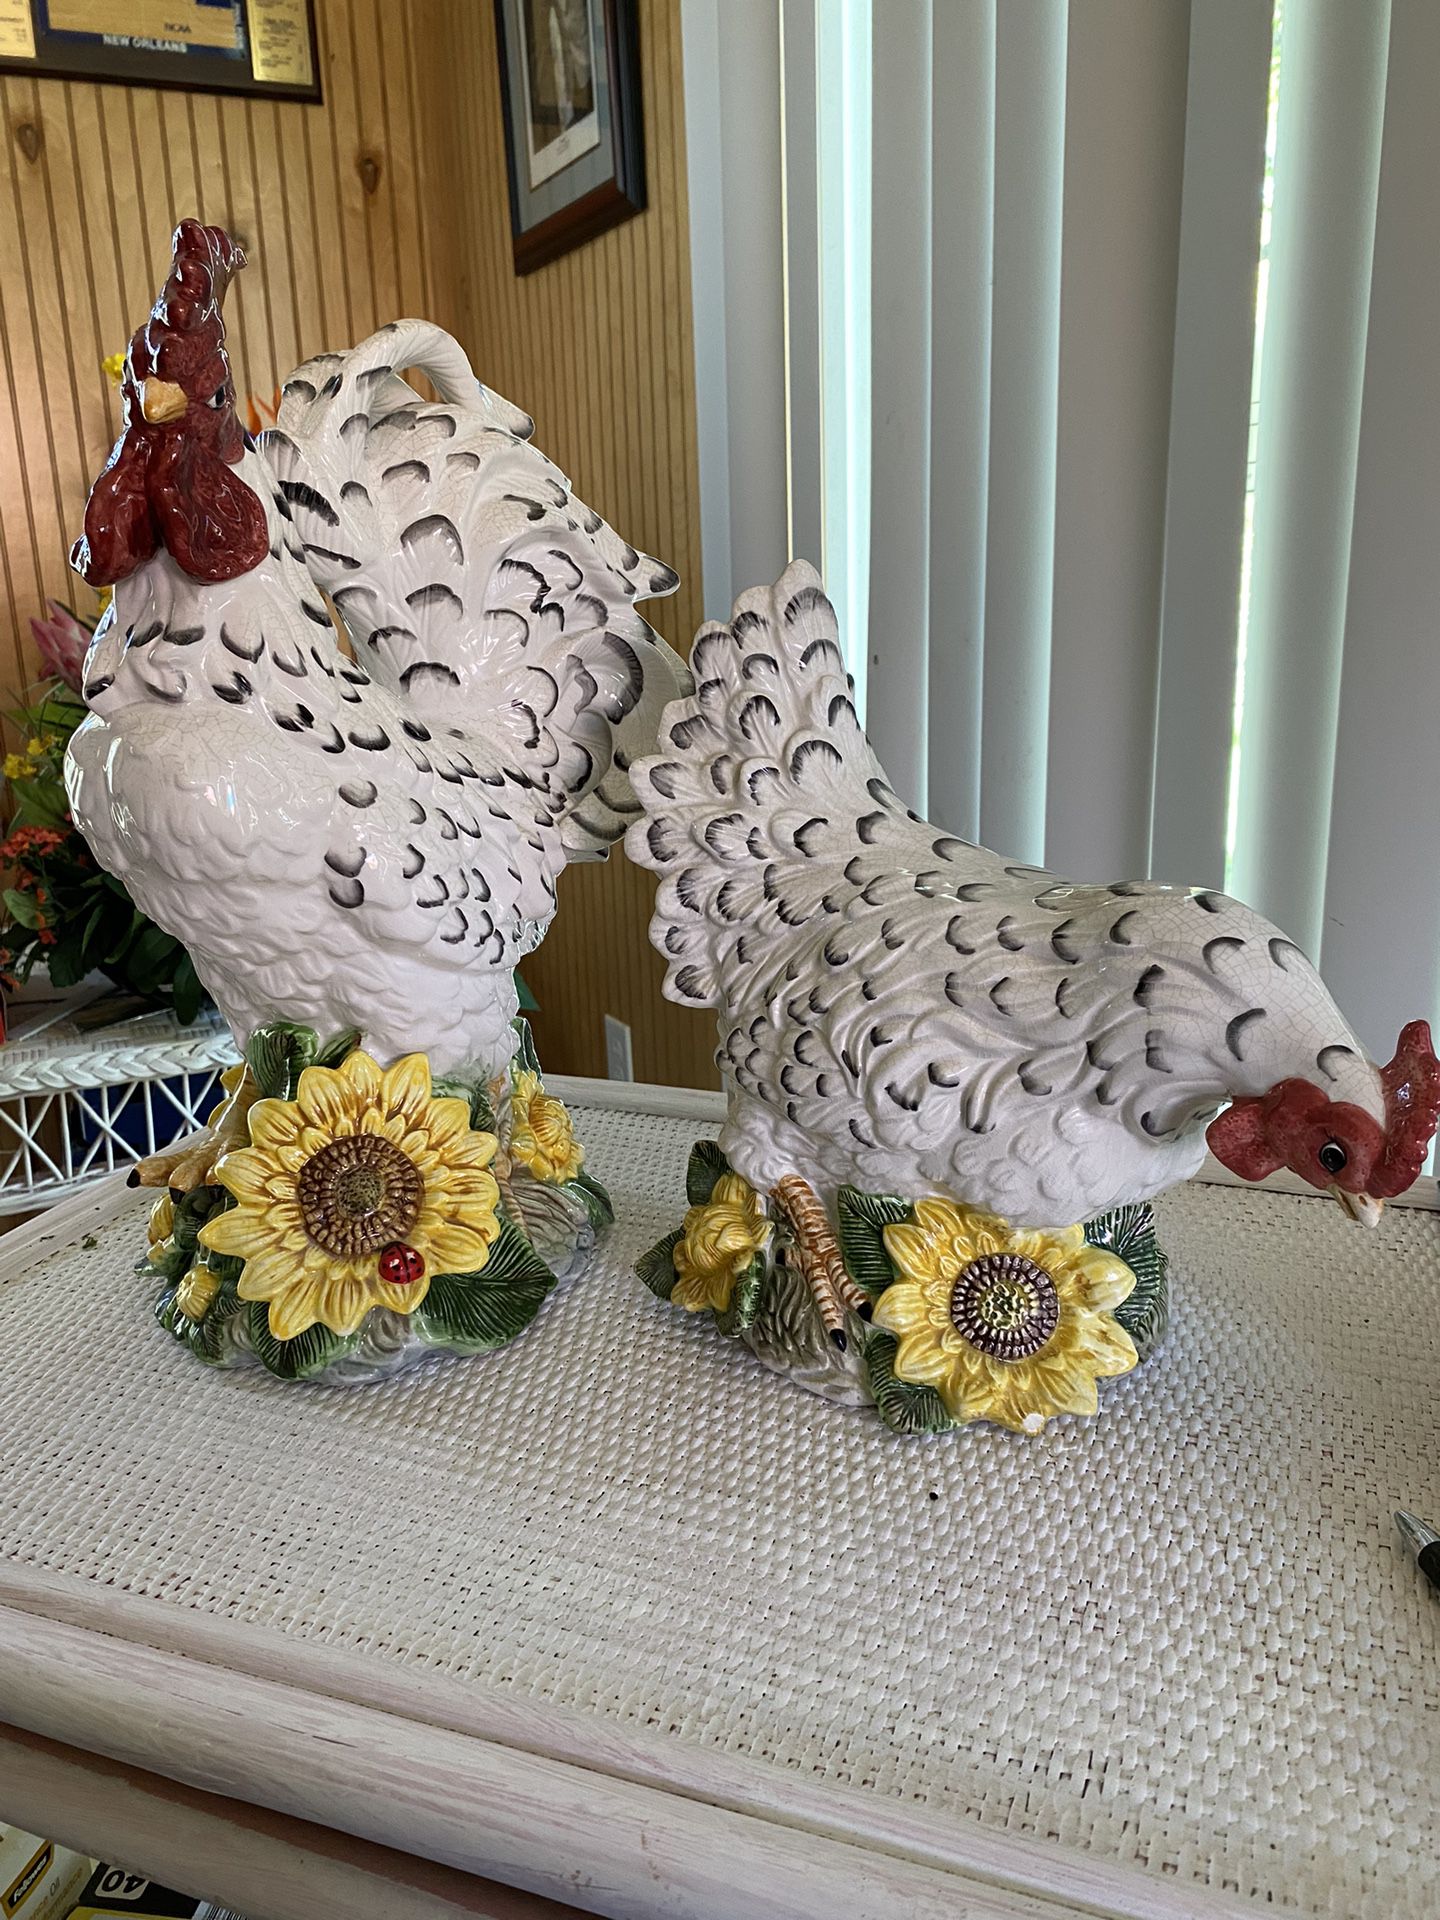 Set Of Rooster And Hen Figurines